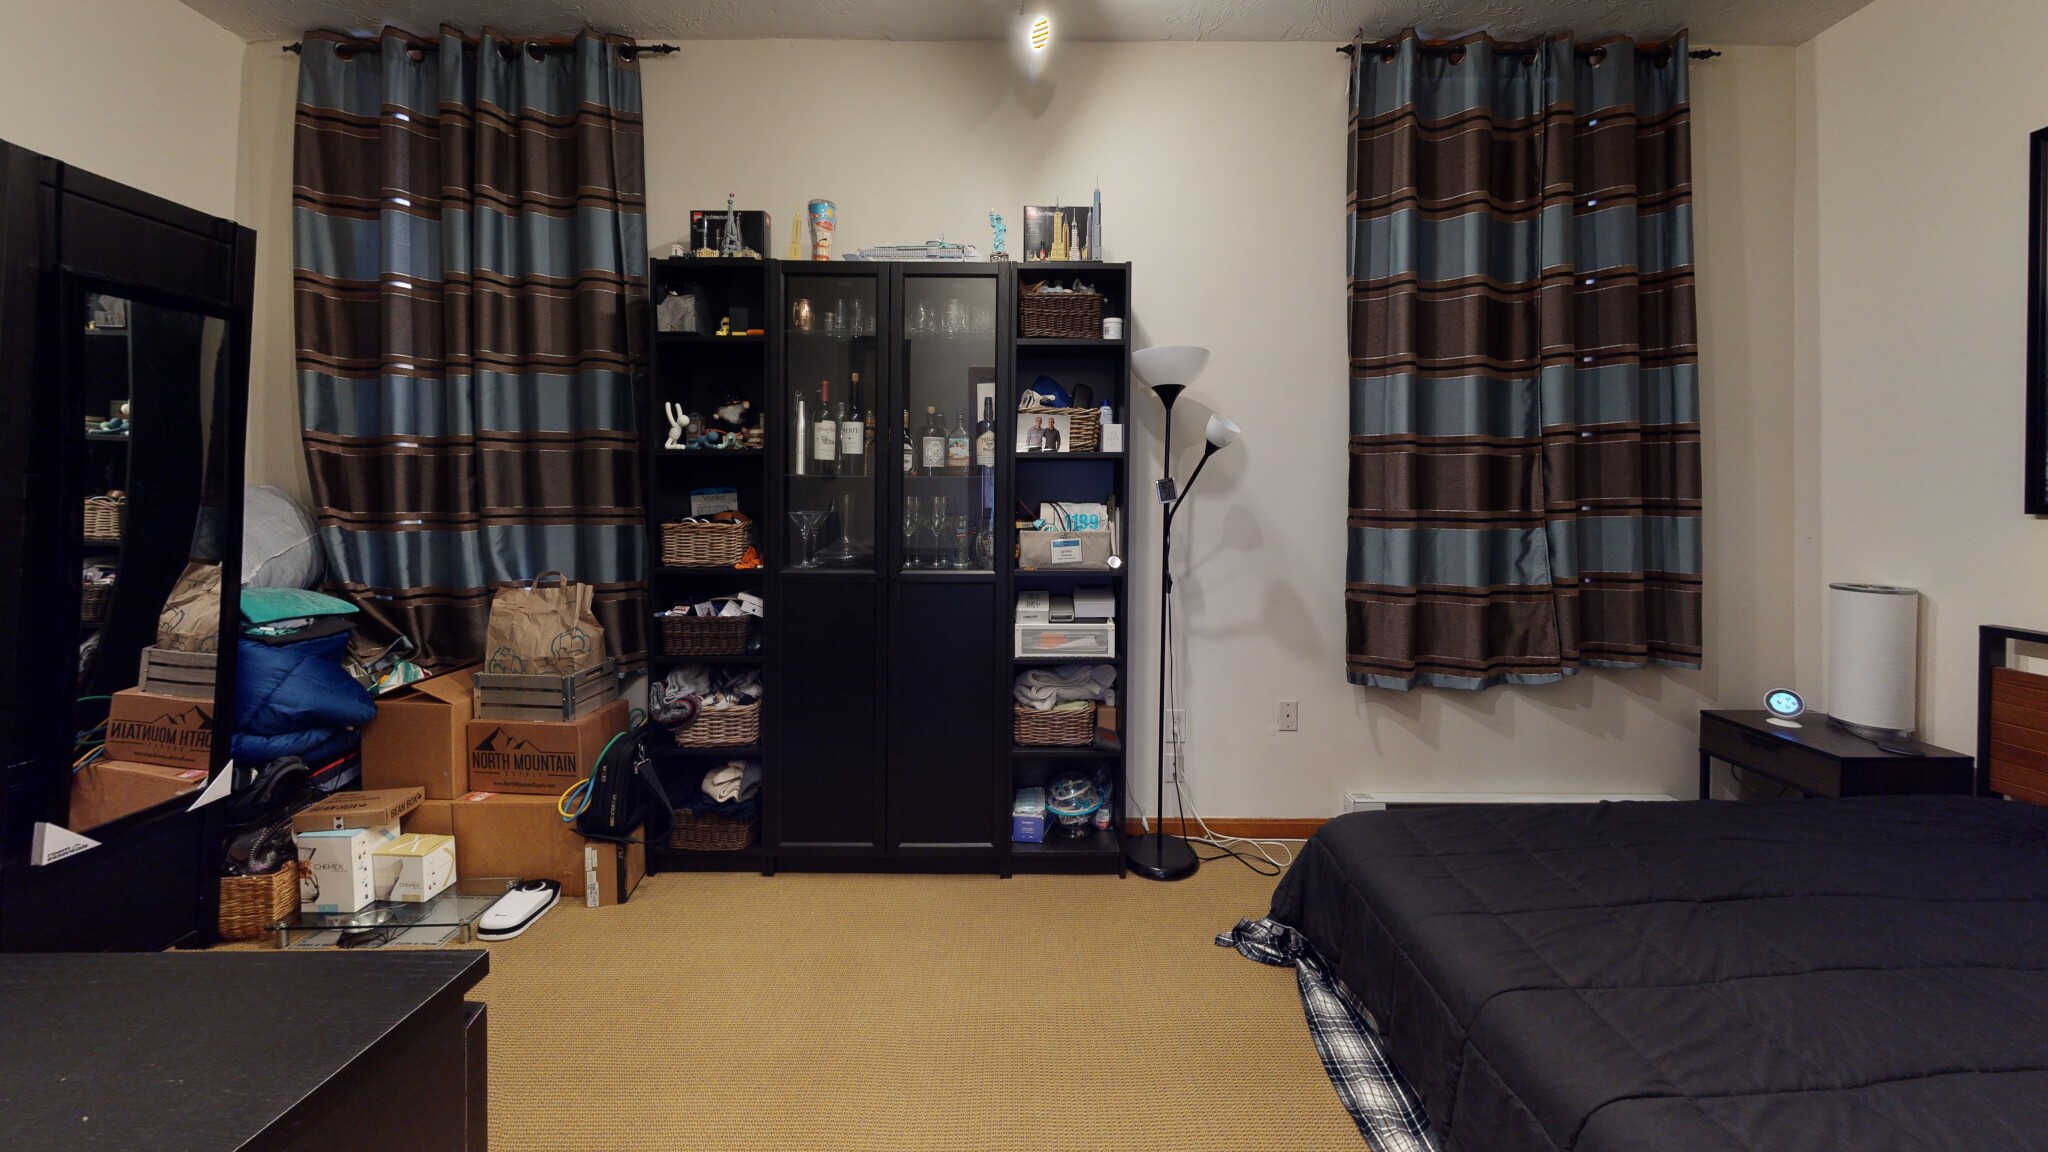 1 Bed, 1 Bath apartment in Boston, Chinatown for $1,800